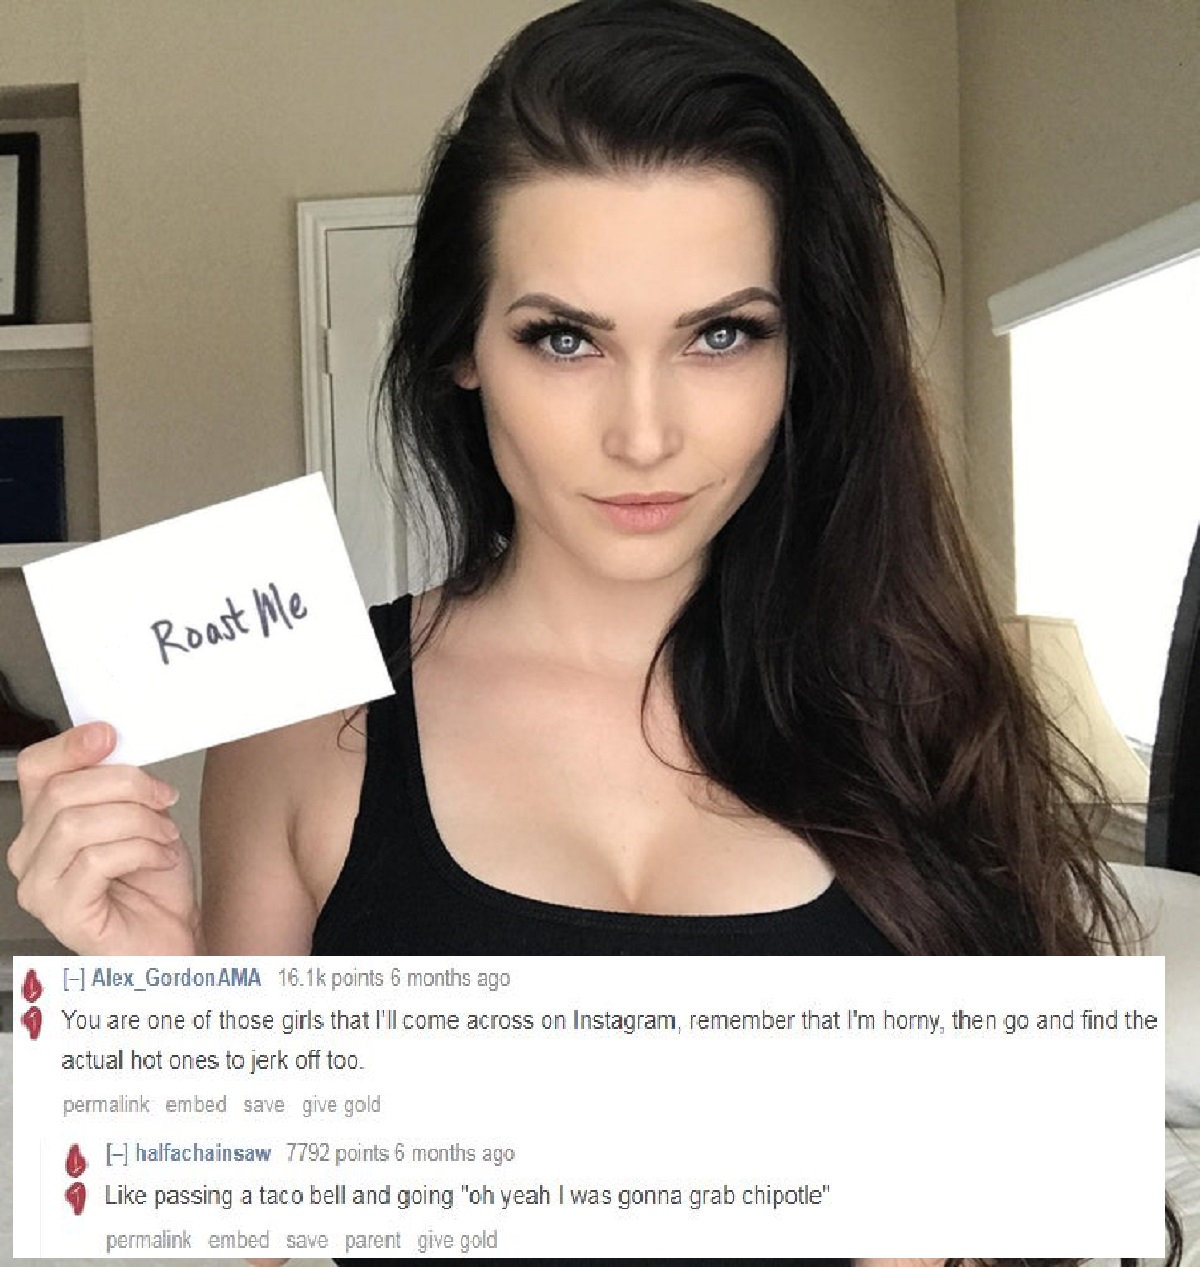 instagram model roastme - Roast Me Alex Gordon Ama points 6 months ago You are one of those girls that I'll come across on Instagram, remember that I'm horny, then go and find the actual hot ones to jerk off too. permalink embed save give gold A halfachai